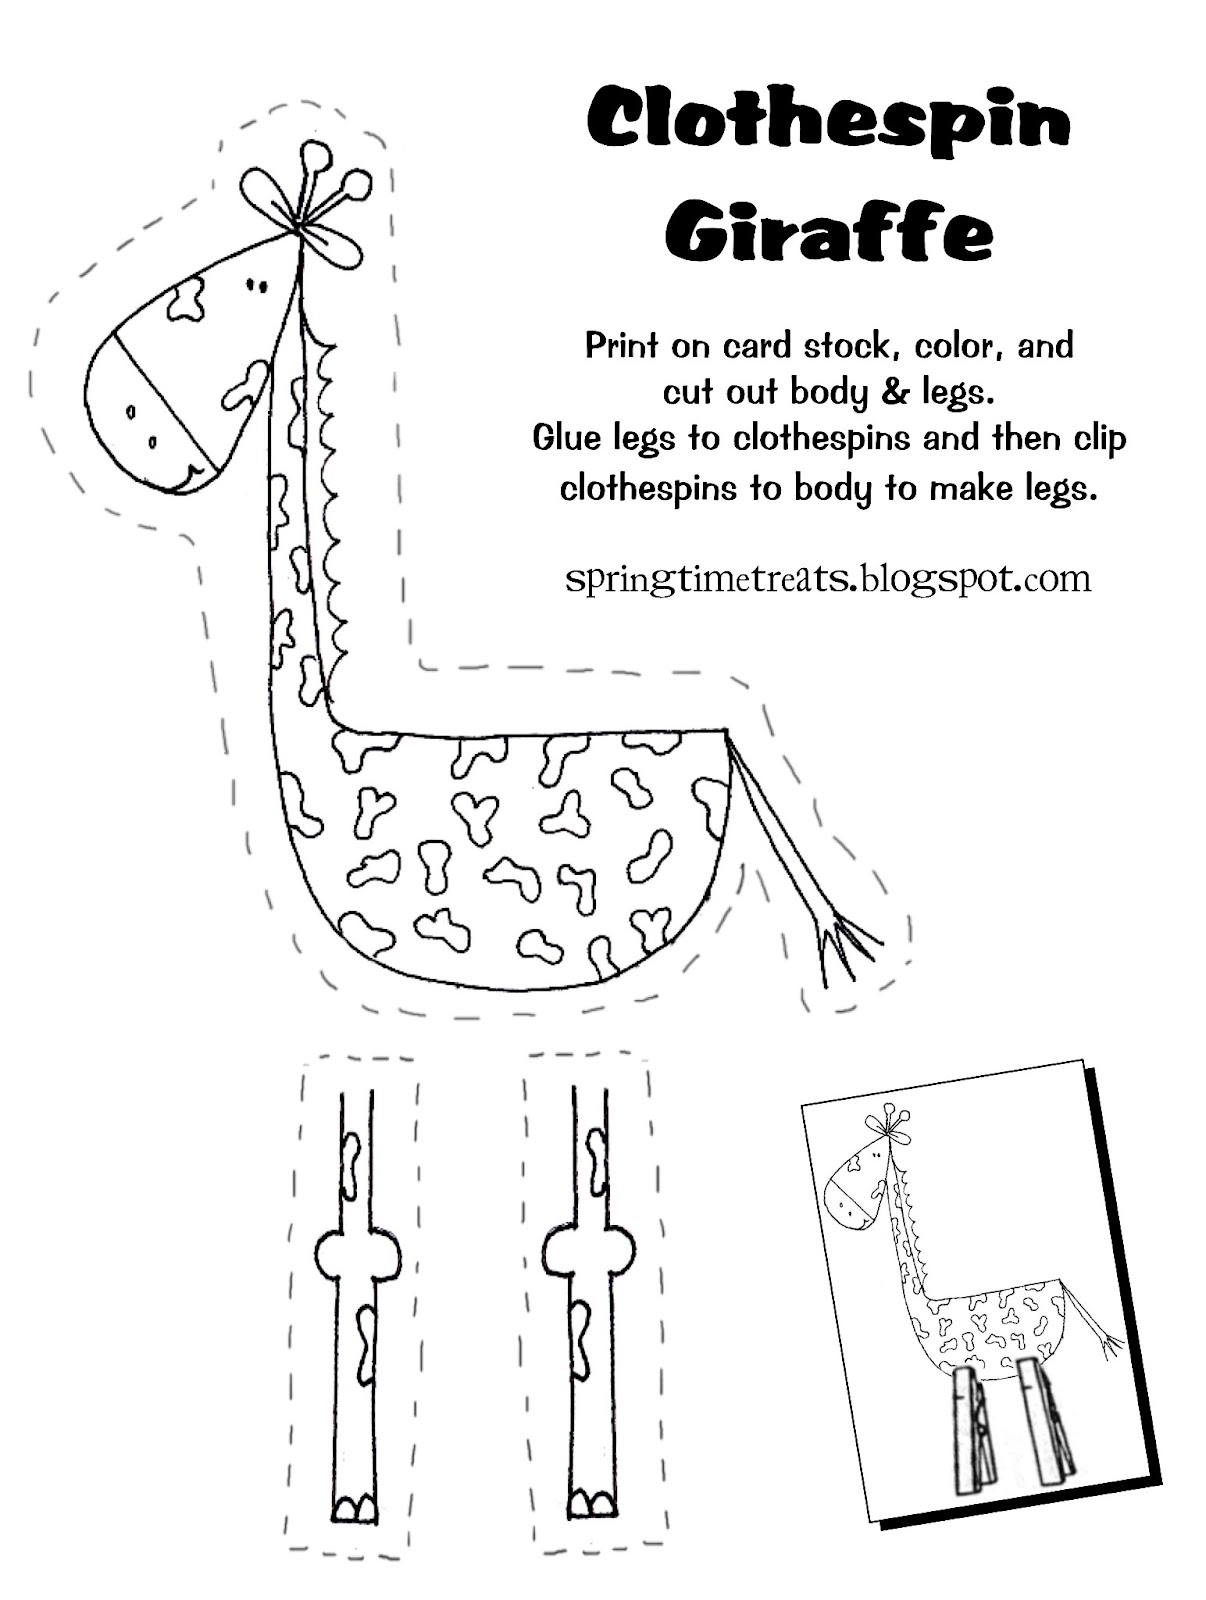 Download Spring Time Treats: Clothespin Giraffe (free printable)